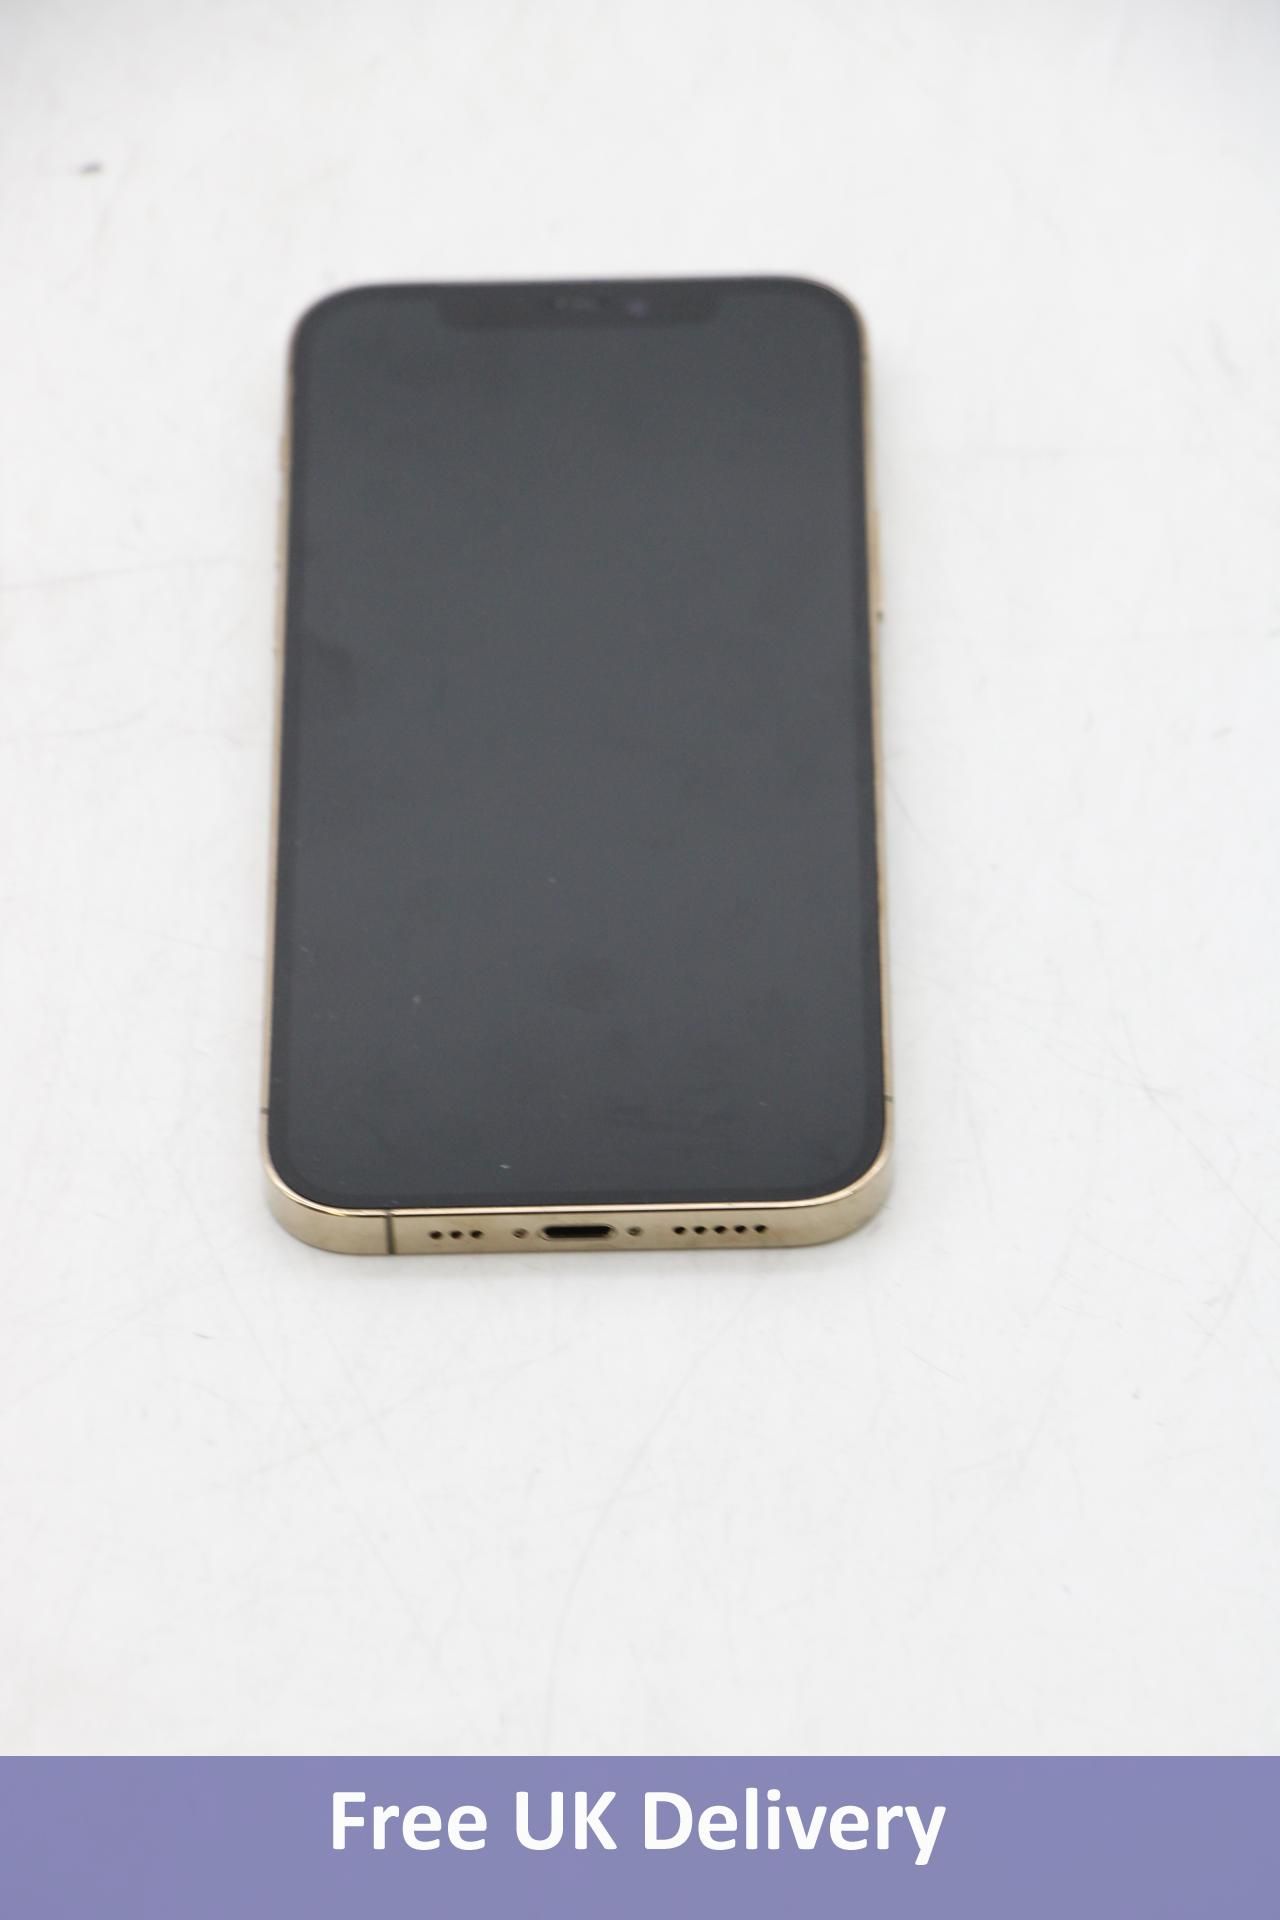 Apple iPhone 12 Pro, 512GB, Gold. Used, no box or accessories. Battery's maximum capacity is 78%. Ch